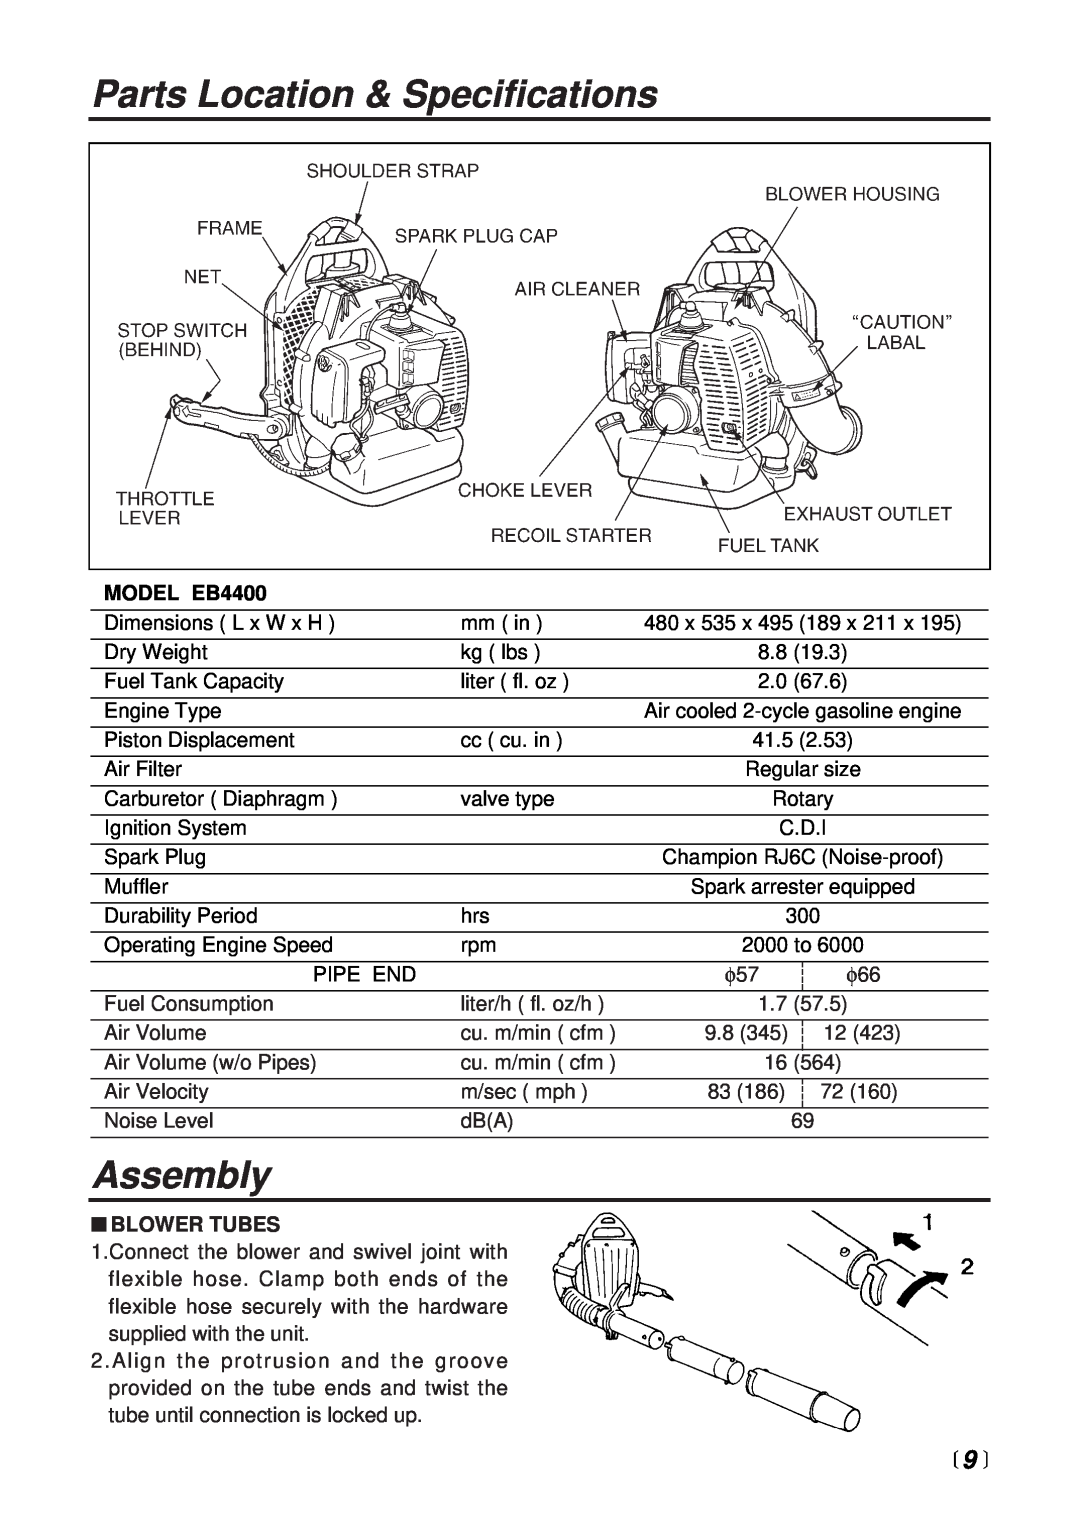 RedMax manual Parts Location & Specifications, Assembly,  9 , MODEL EB4400, Blower Tubes 